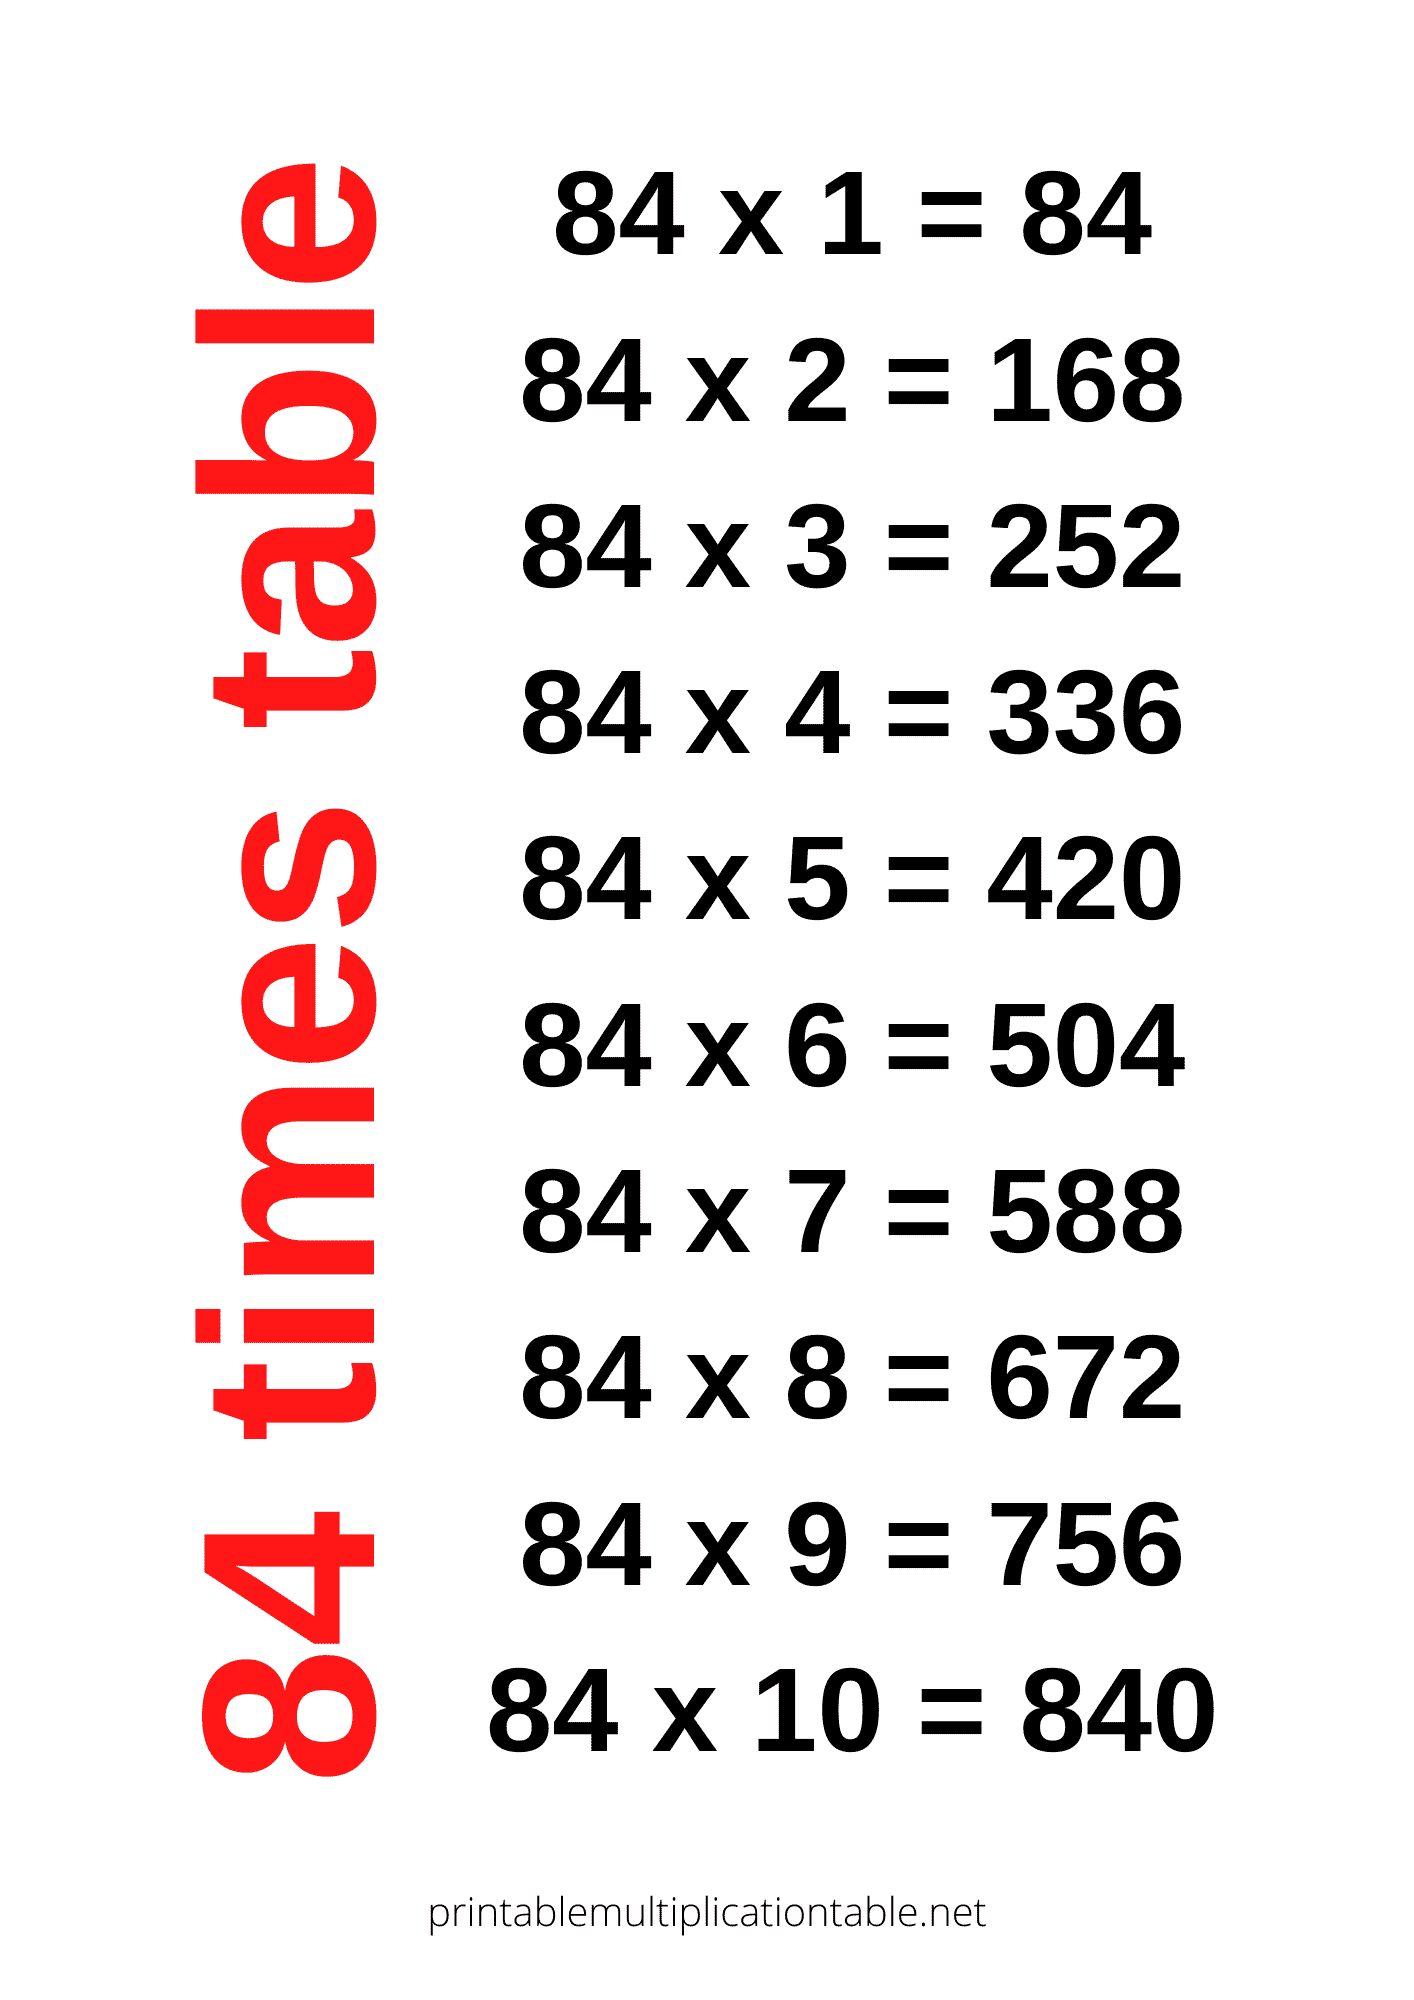 84 times table chart